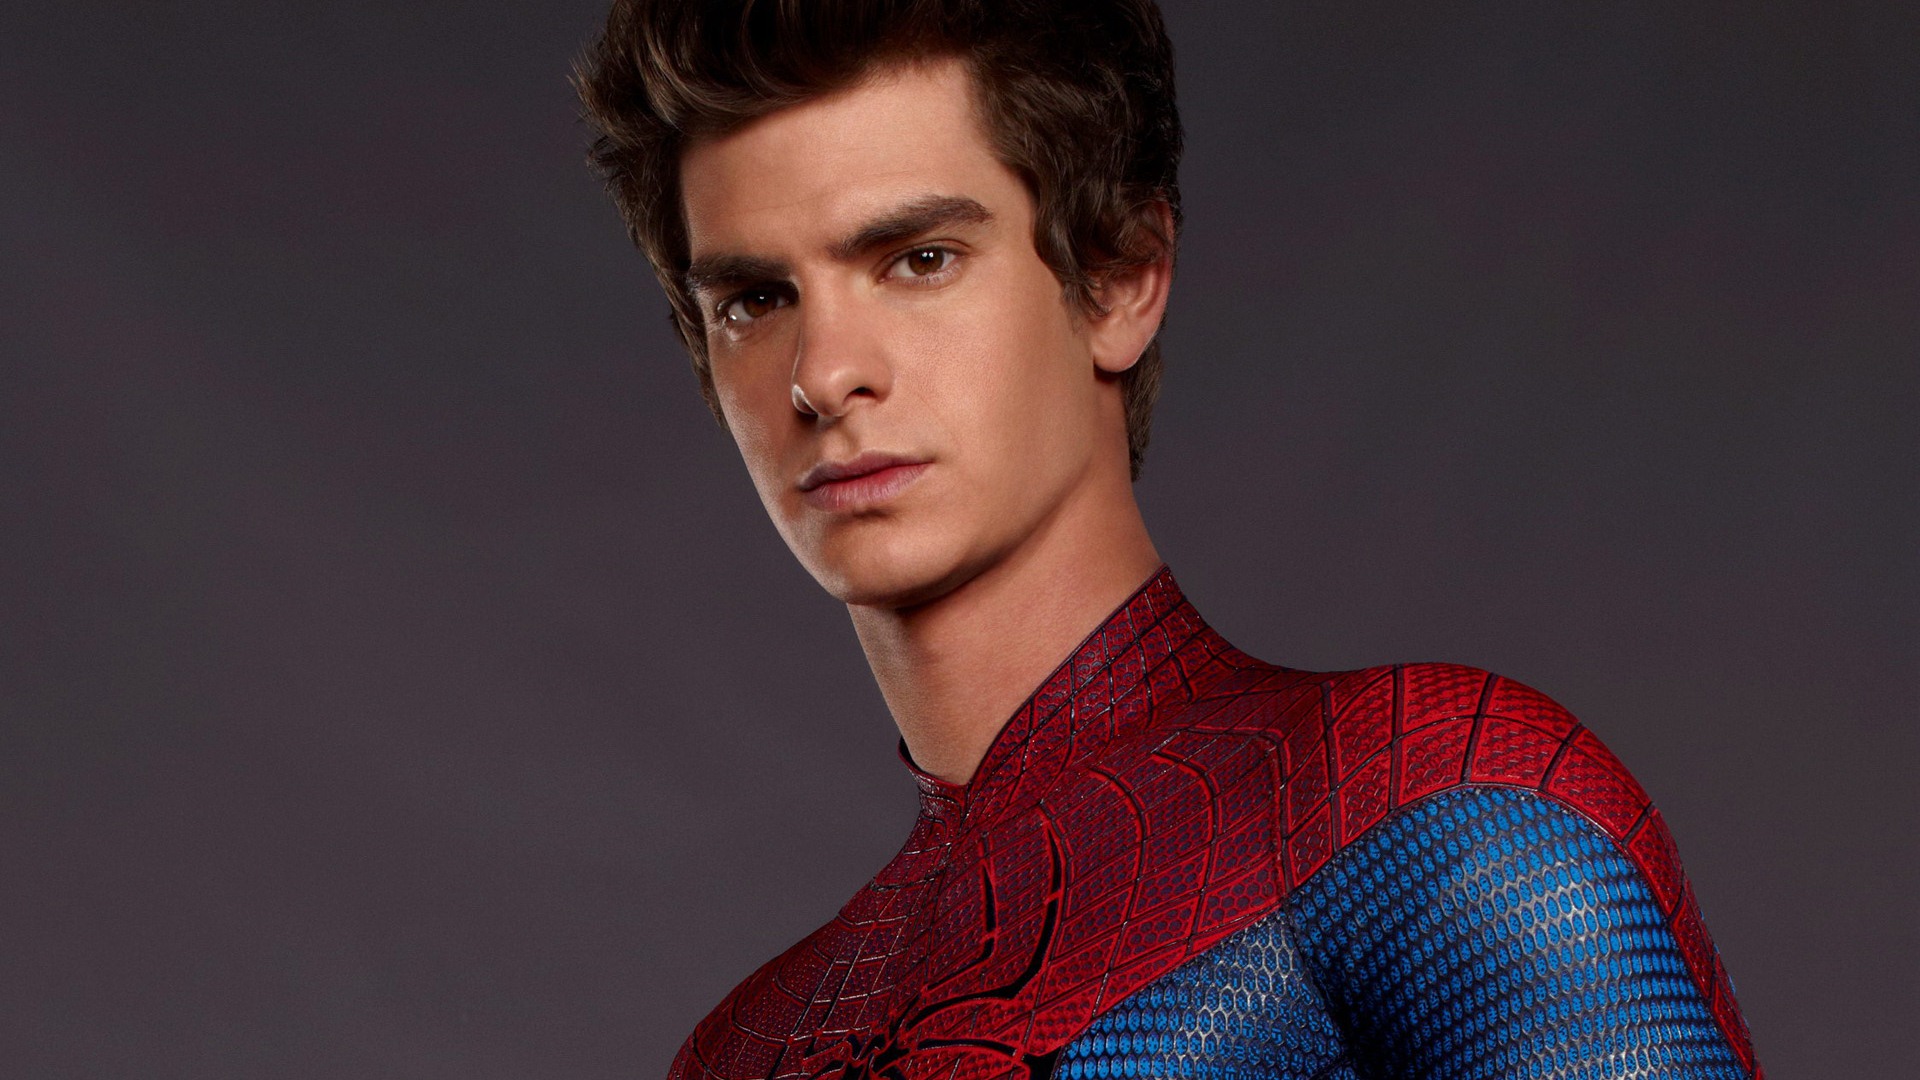 Le 2012 Amazing Spider-Man wallpapers #2 - 1920x1080